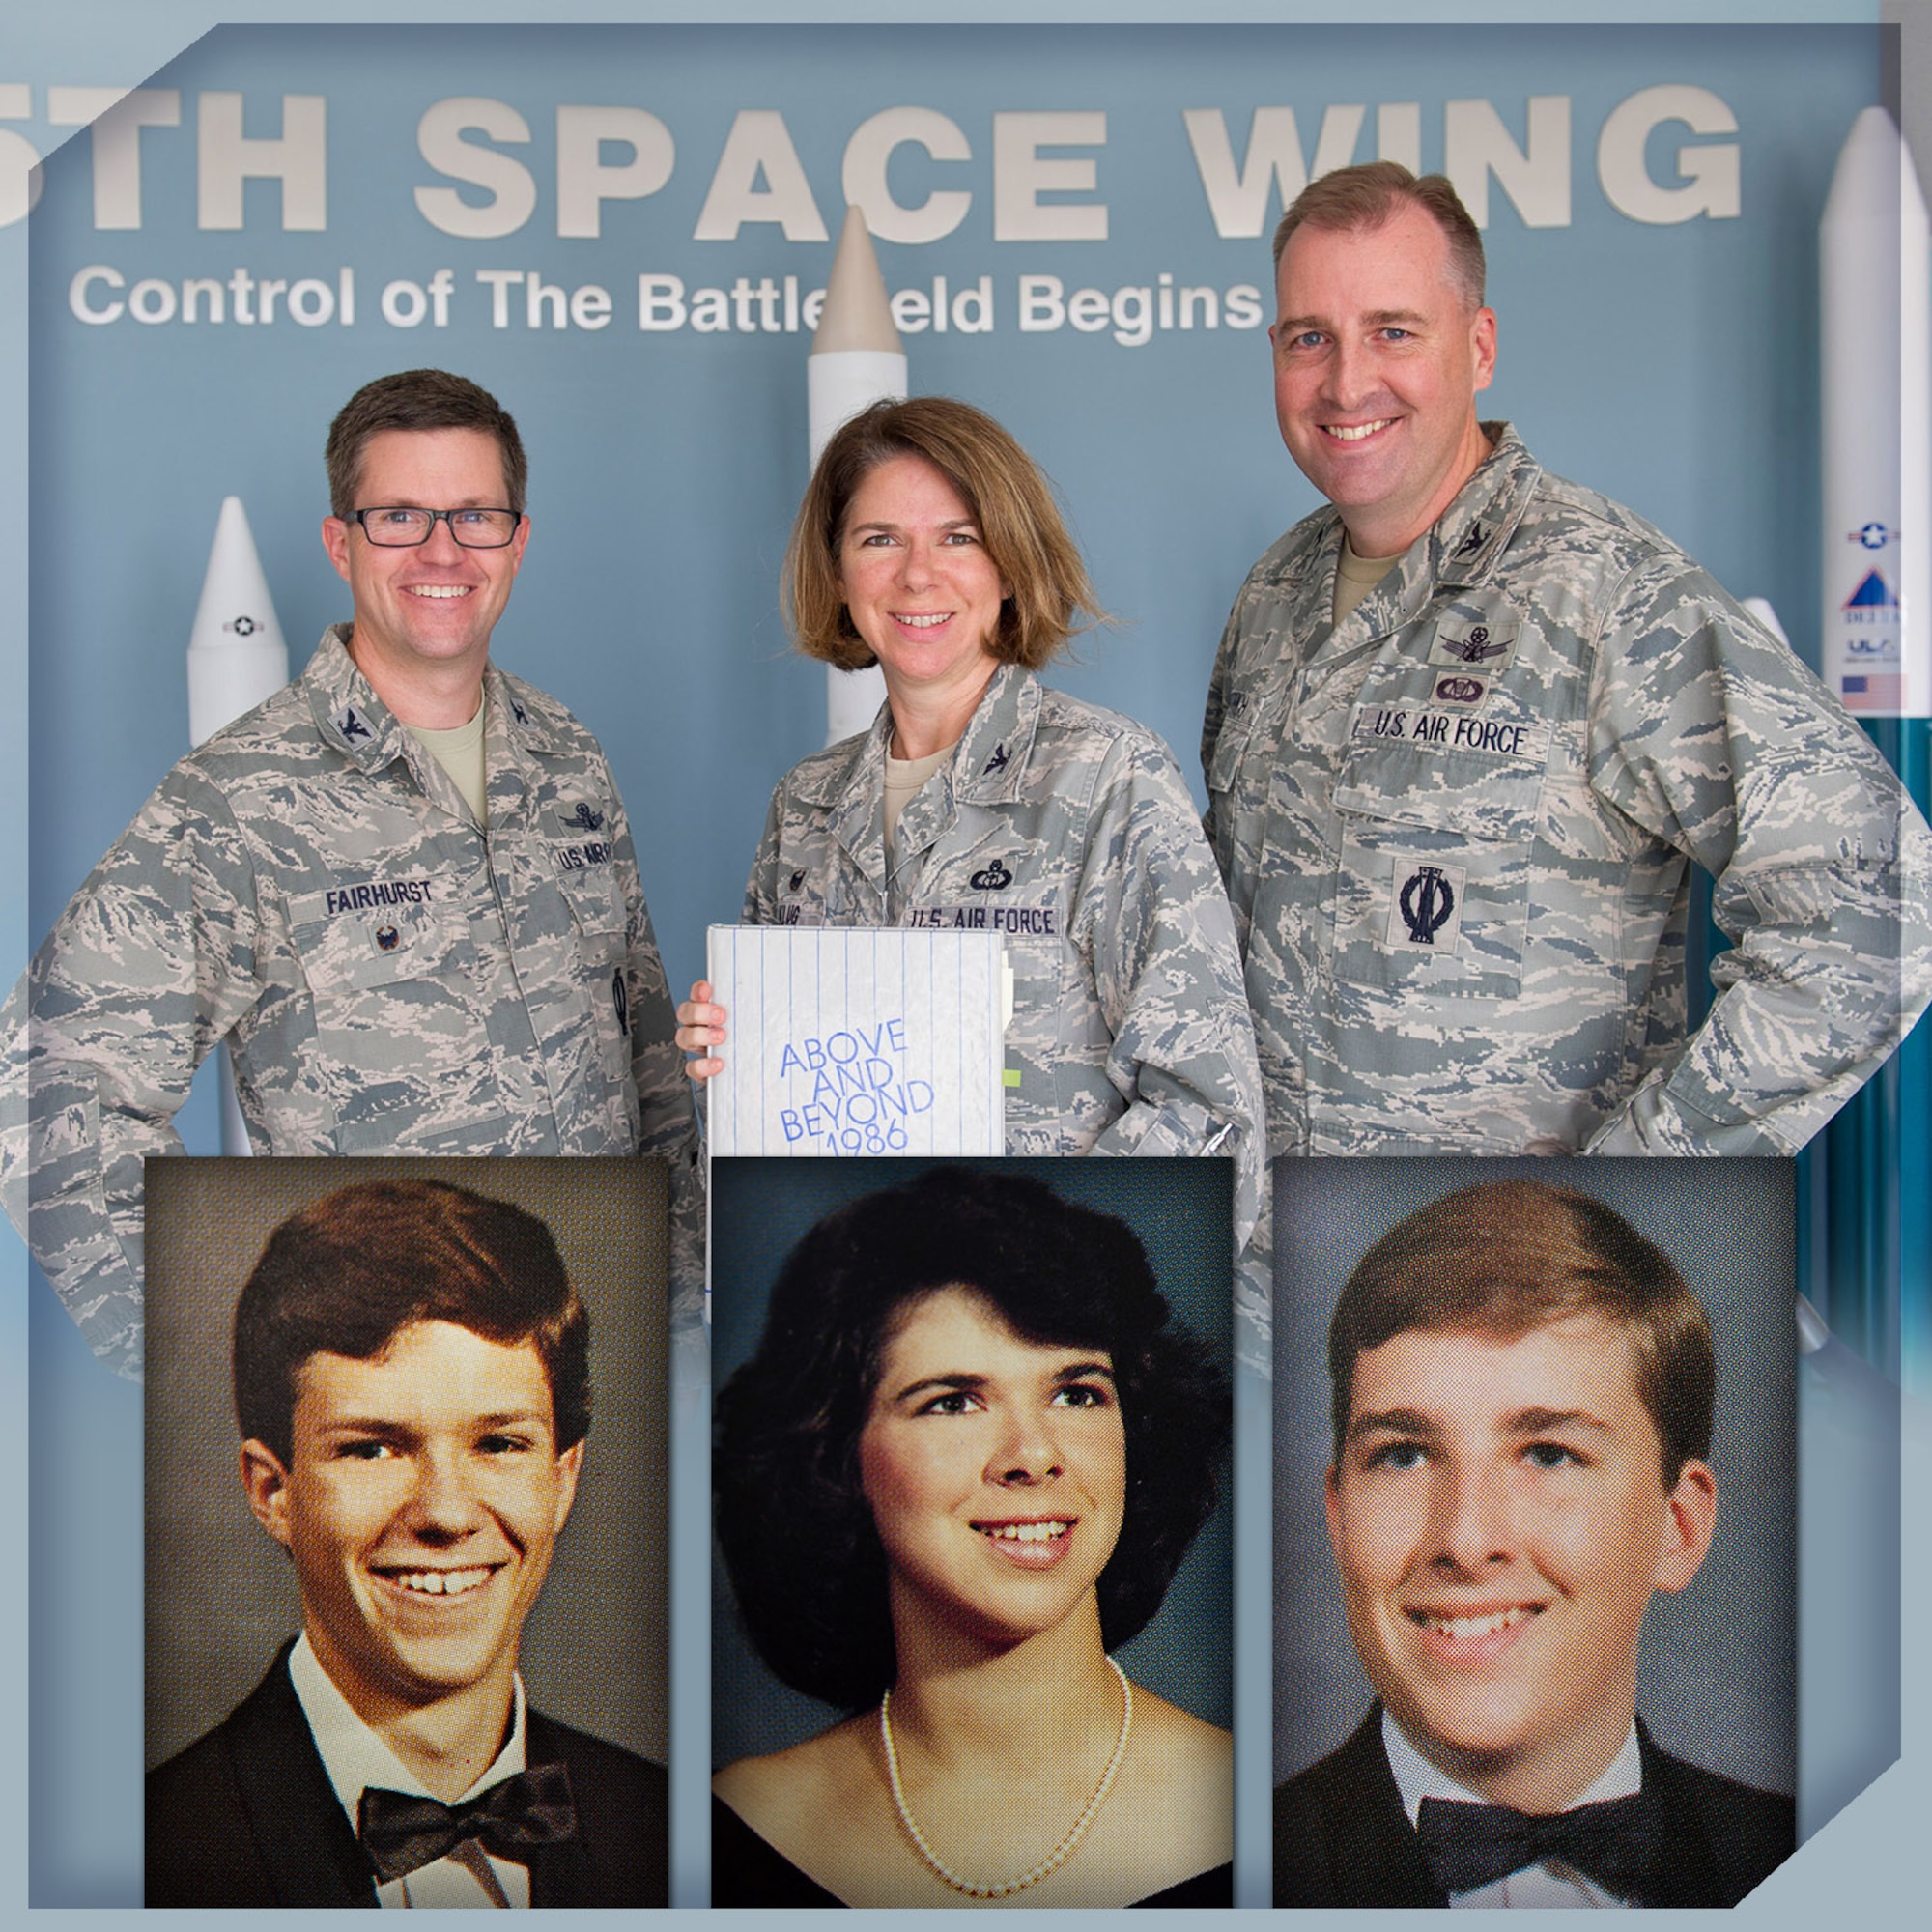 Colonels Shawn Fairhurst, 45th Space Wing vice commander, Daniel Gottrich, 45th SW chief of safety,Shannon Klug, 45th Weather Squadron commander, pose with one of their high school's yearbook and the inserted photos in the graphic show photos of them as students of James W. Robinson Secondary School in Fairfax, Va., in the late 1980s. Fairhurst’s senior photo is in Klug’s 1986 yearbook where she was featured as a junior. She graduated in 1987 and Gottrich graduated in 1988. The yearbook pages prove the three former Robinson Rams who were once strangers are now Air Force Wingmen, leading extraordinary missions from the nation’s gateway to space.(U.S. Air Force photo by Matthew Jurgens/released)